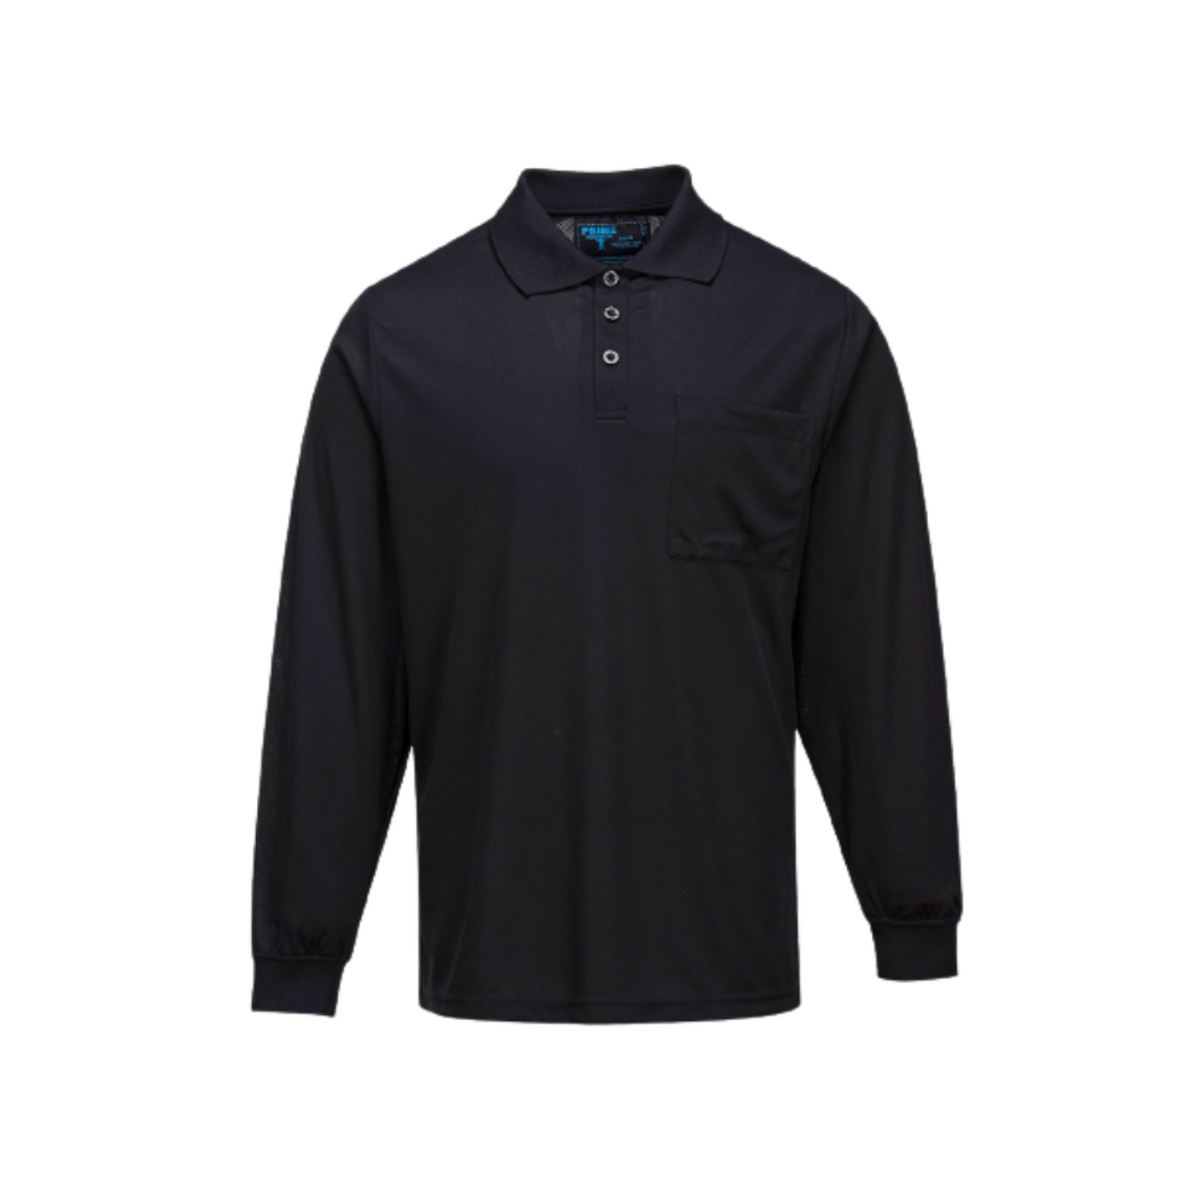 Portwest Long Sleeve Solid Colour Micro Mesh Polo Black Casual Shirt MP103-Collins Clothing Co